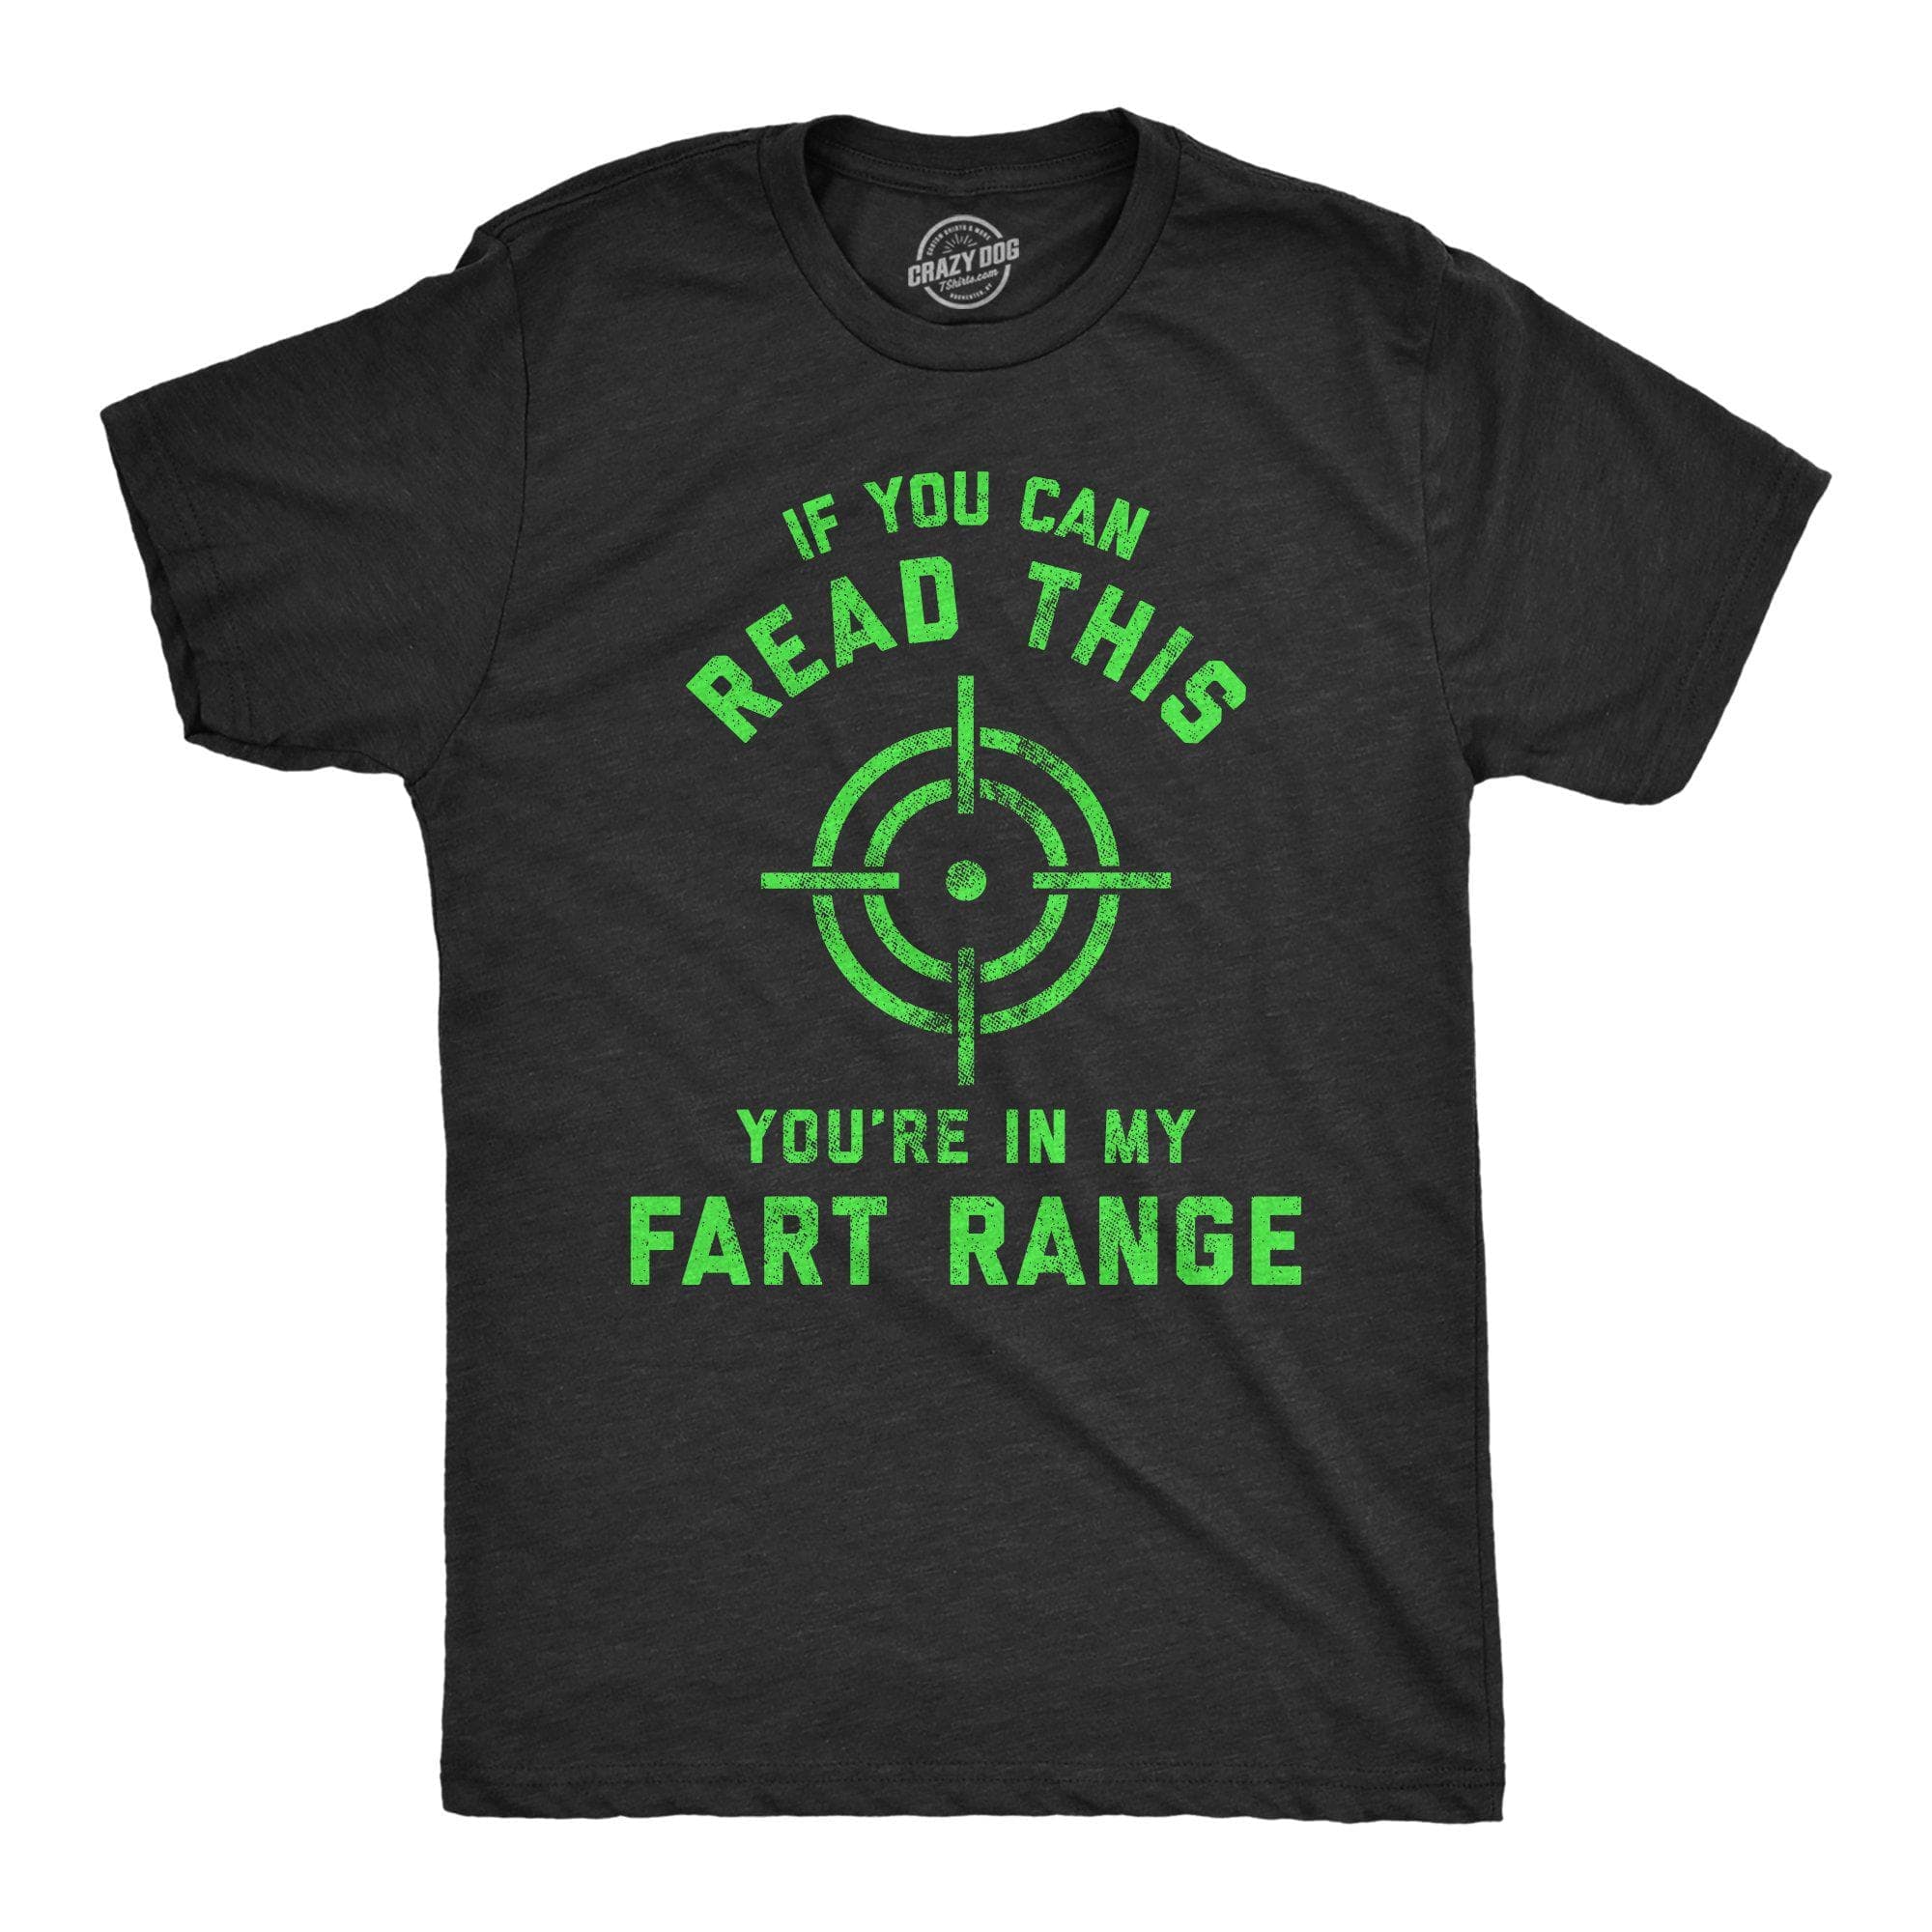 If You Can Read This You're In My Fart Range Men's Tshirt - Crazy Dog T-Shirts